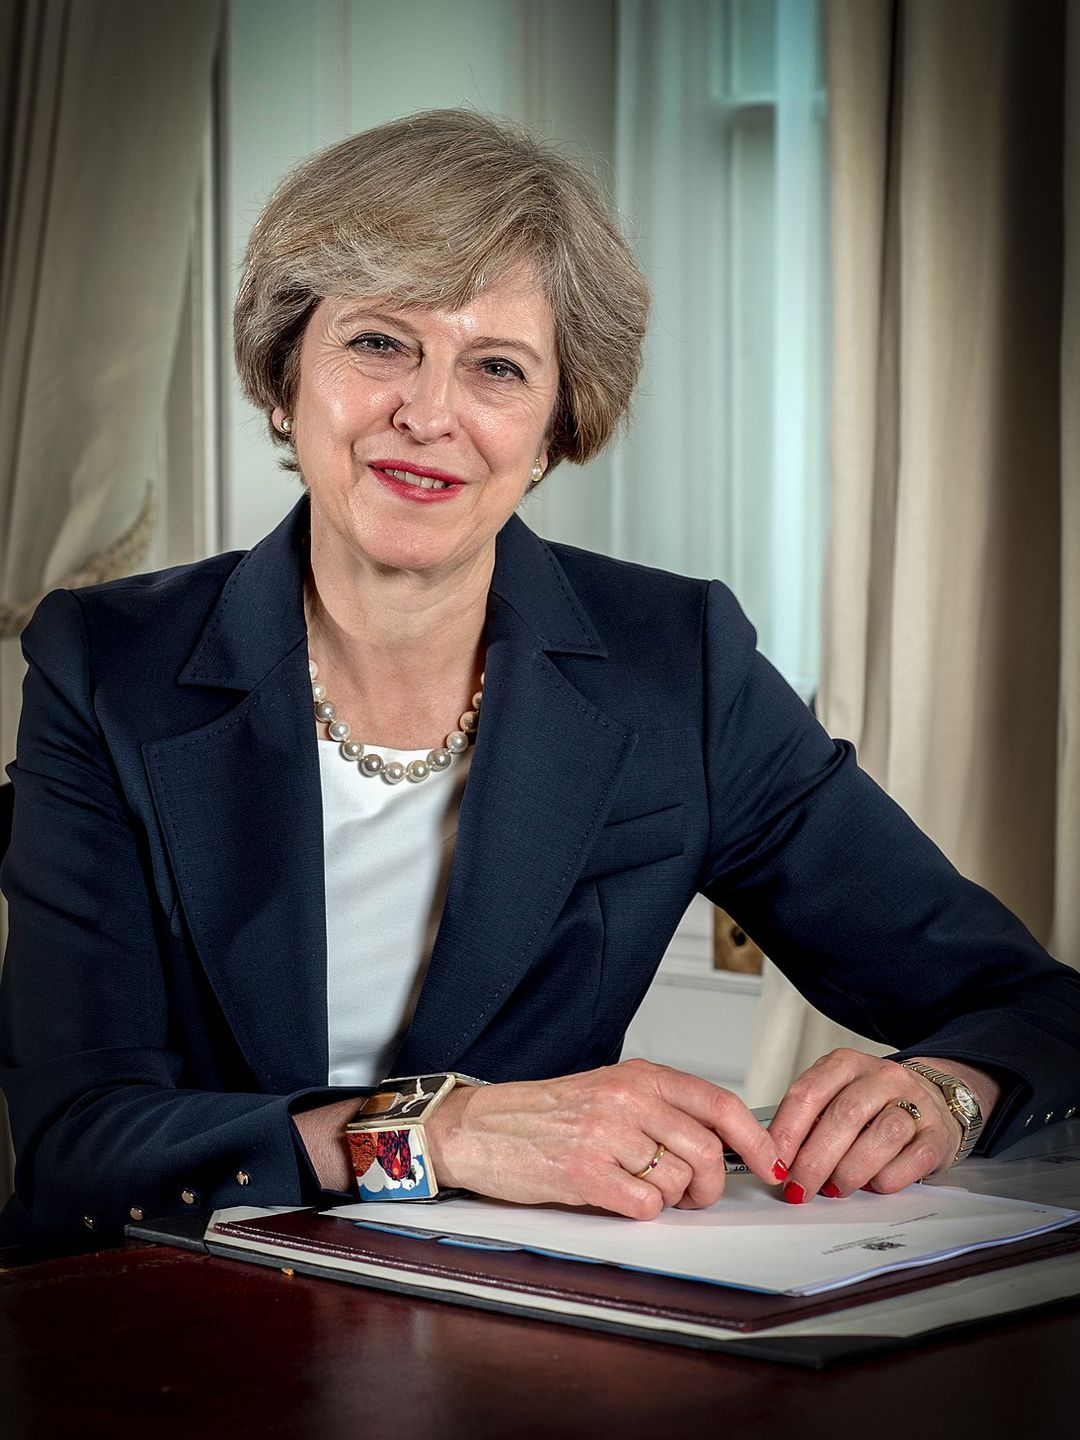 Theresa Mary May how old is she